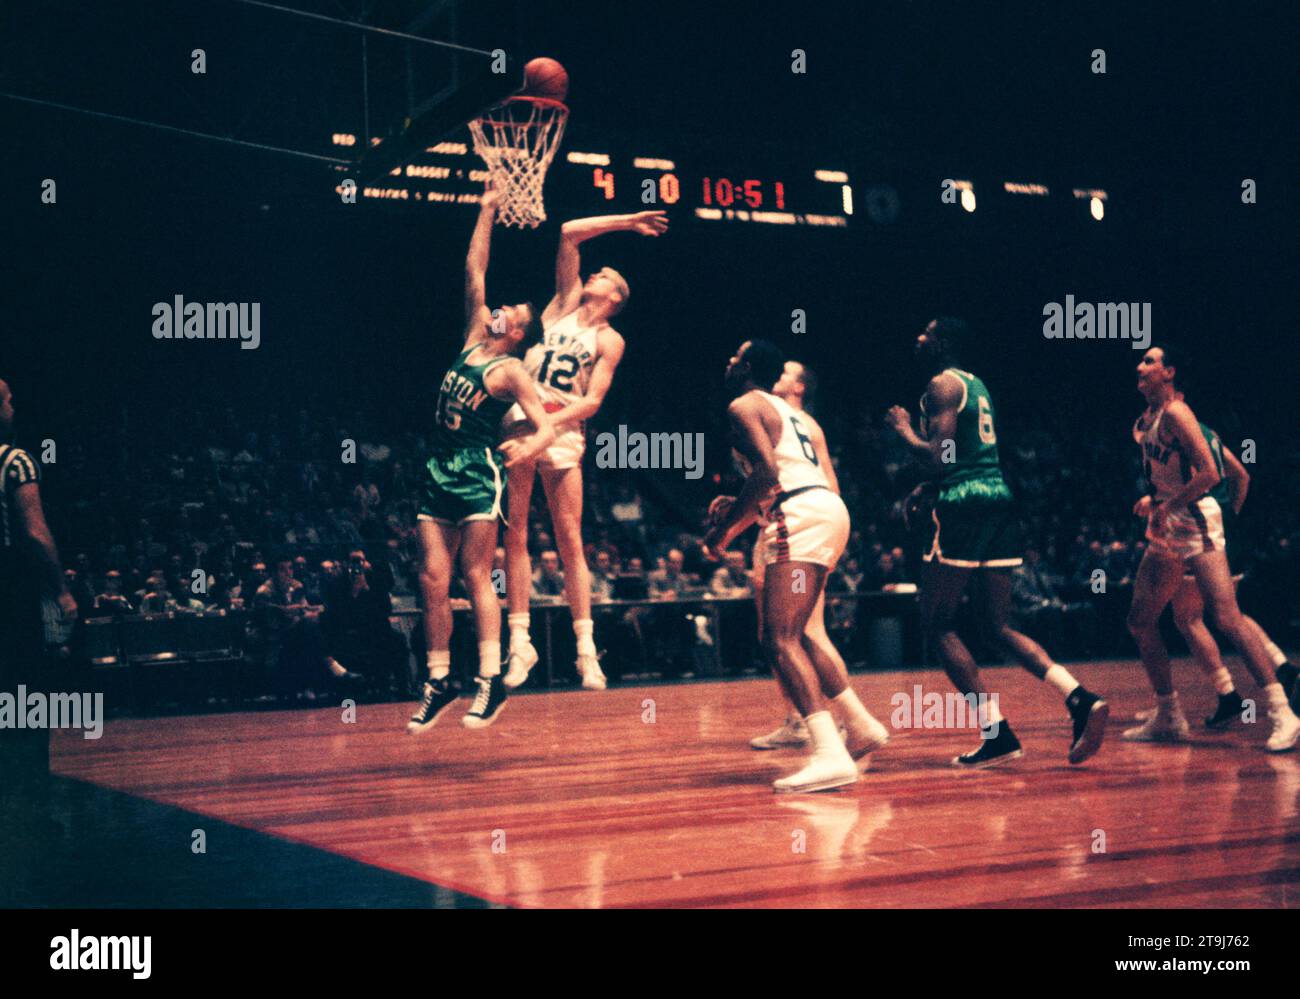 NEW YORK, NY - OCTOBER 25:  Tom Heinsohn #15 of the Boston Celtics shoots as Kenny Sears #12 of the New York Knicks goes for the block during an NBA game on October 25, 1958 at the Madison Square Garden in New York, New York.  (Photo by Hy Peskin) *** Local Caption *** Tom Heinsohn;Kenny Sears Stock Photo